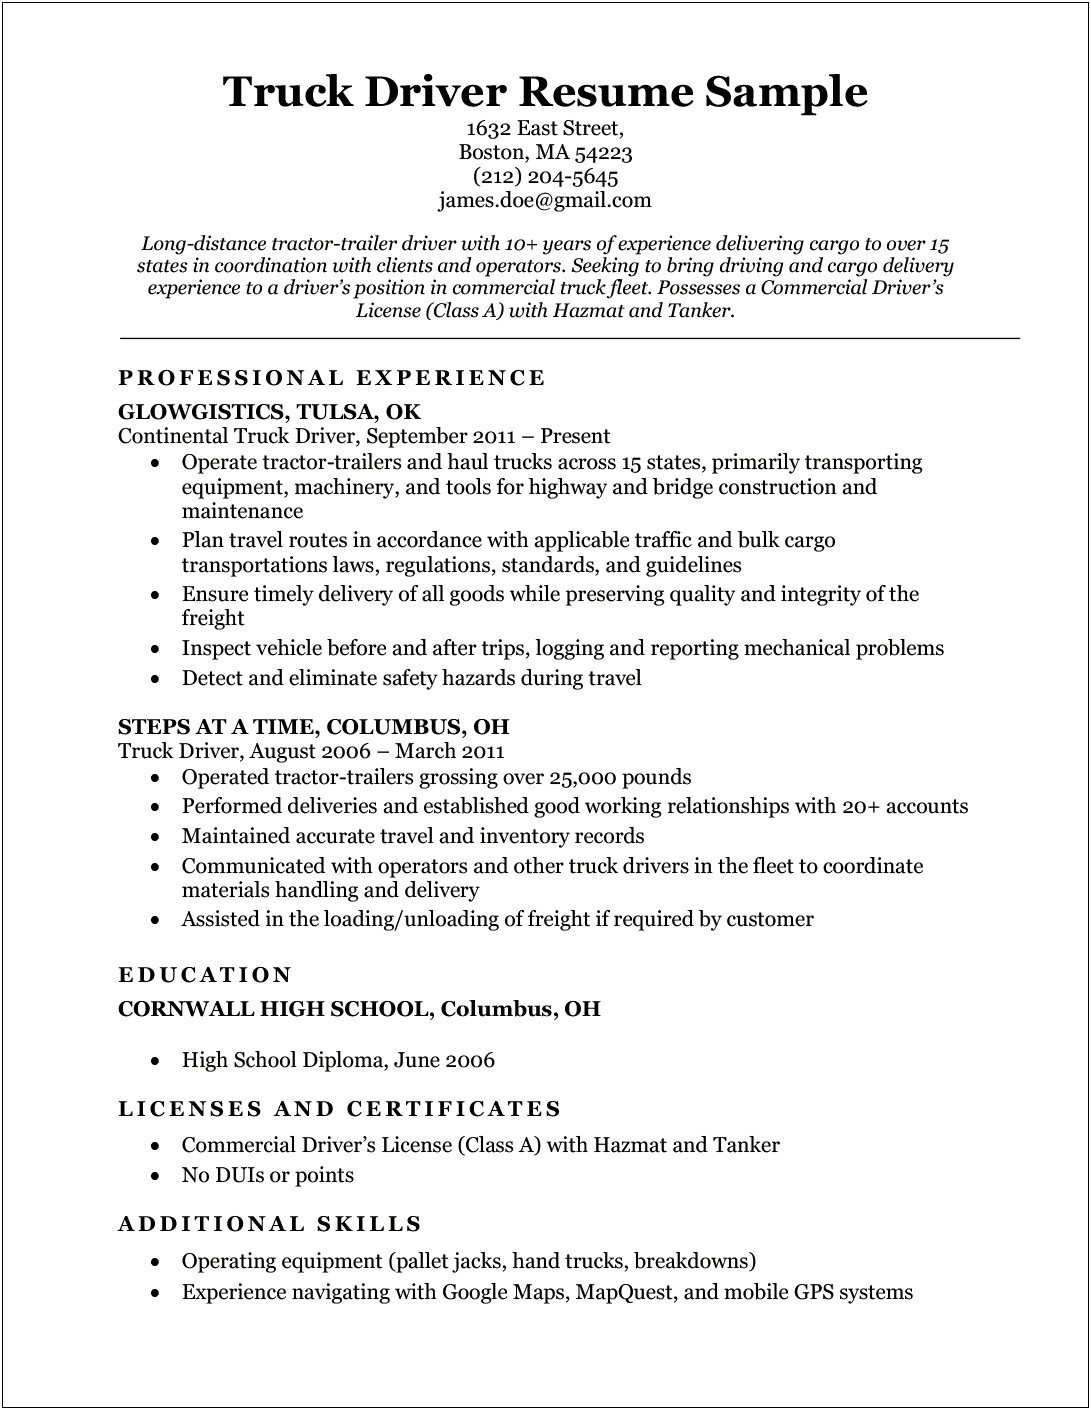 Resume Objective Statement Examples Truck Driver